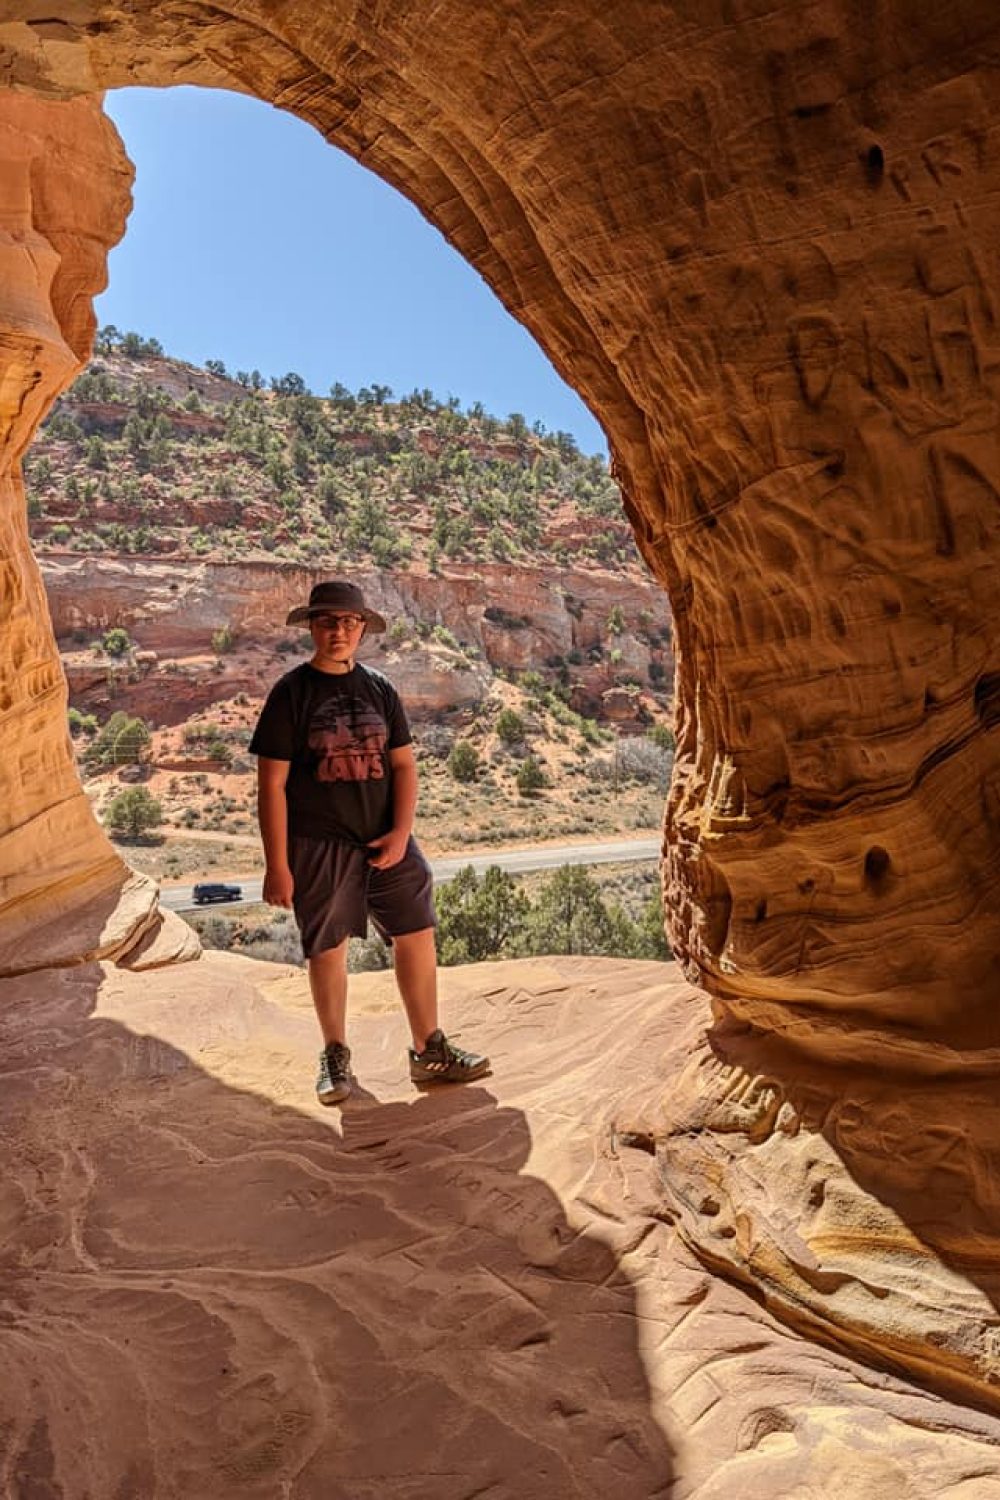 Mikey in the sand cave in Kanab, Utah